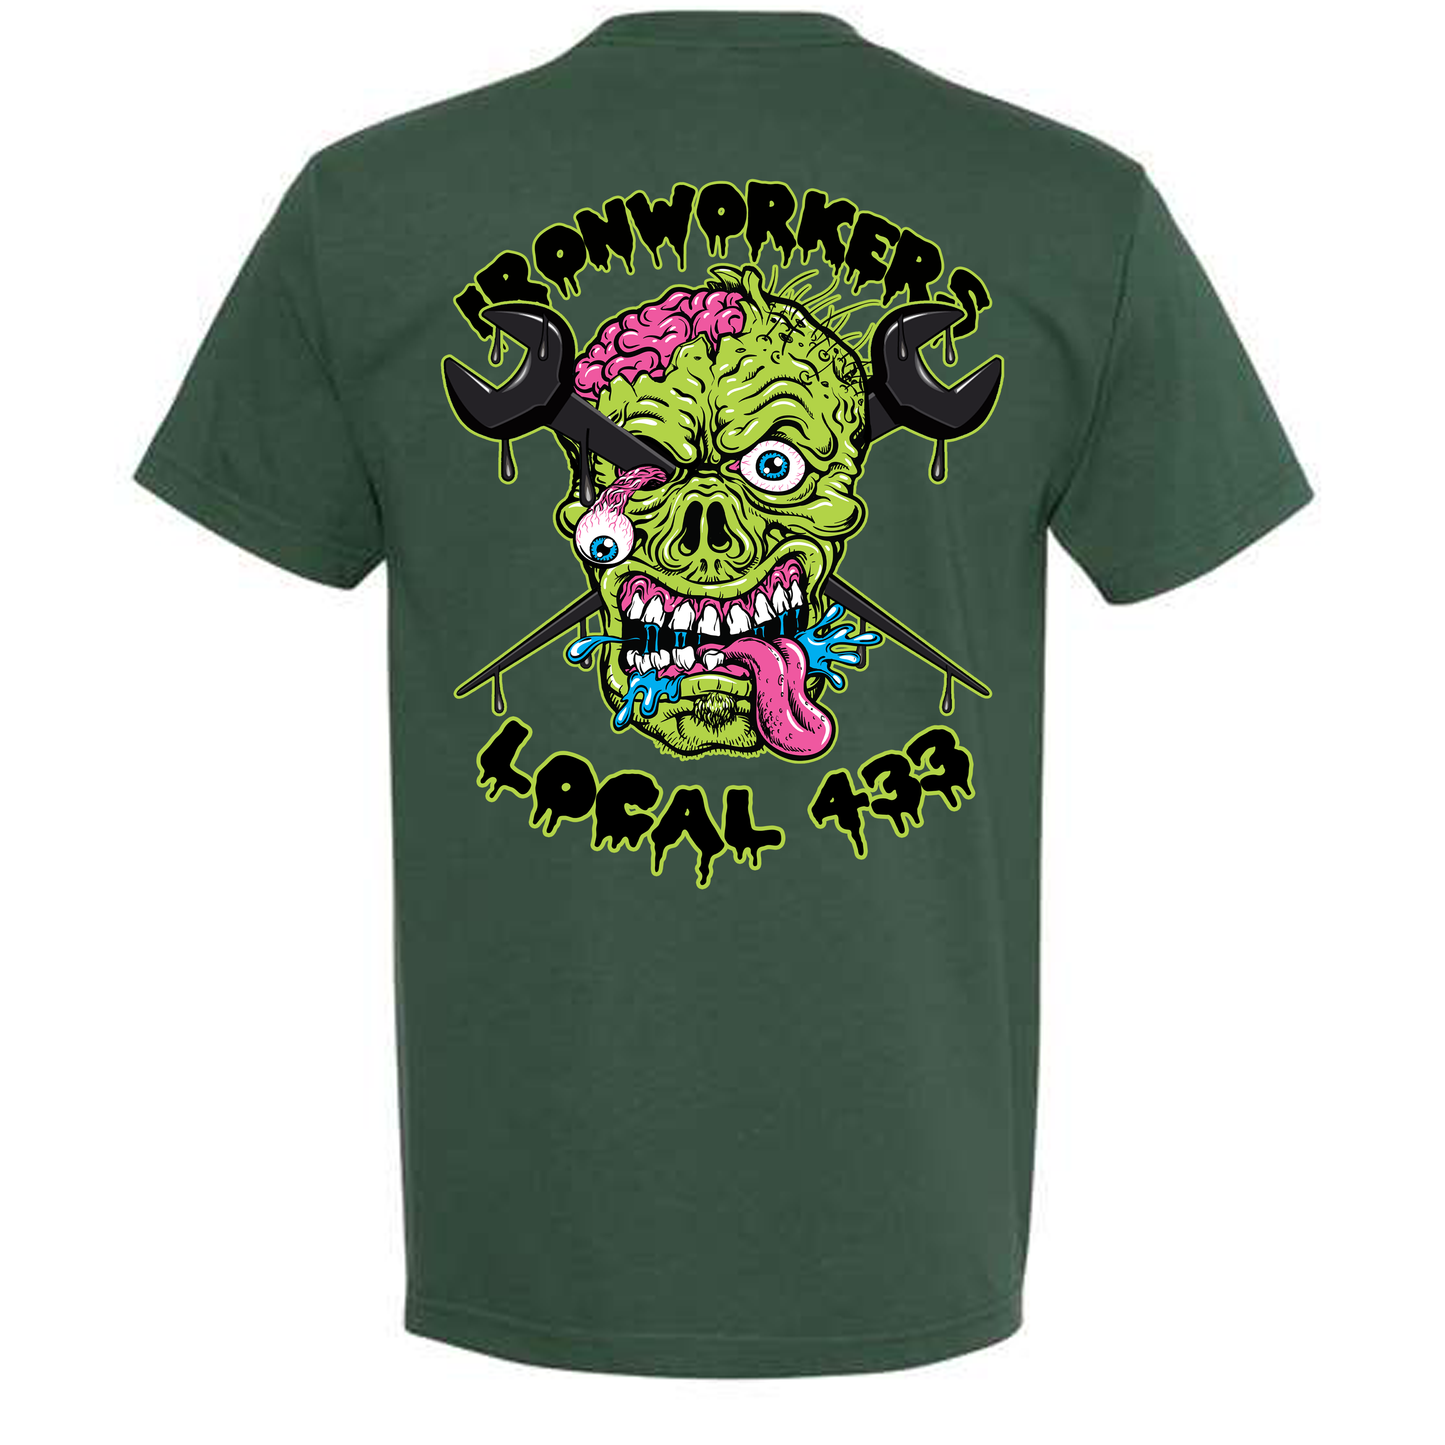 IW ZOMBIE LOCAL 433 T-SHIRT